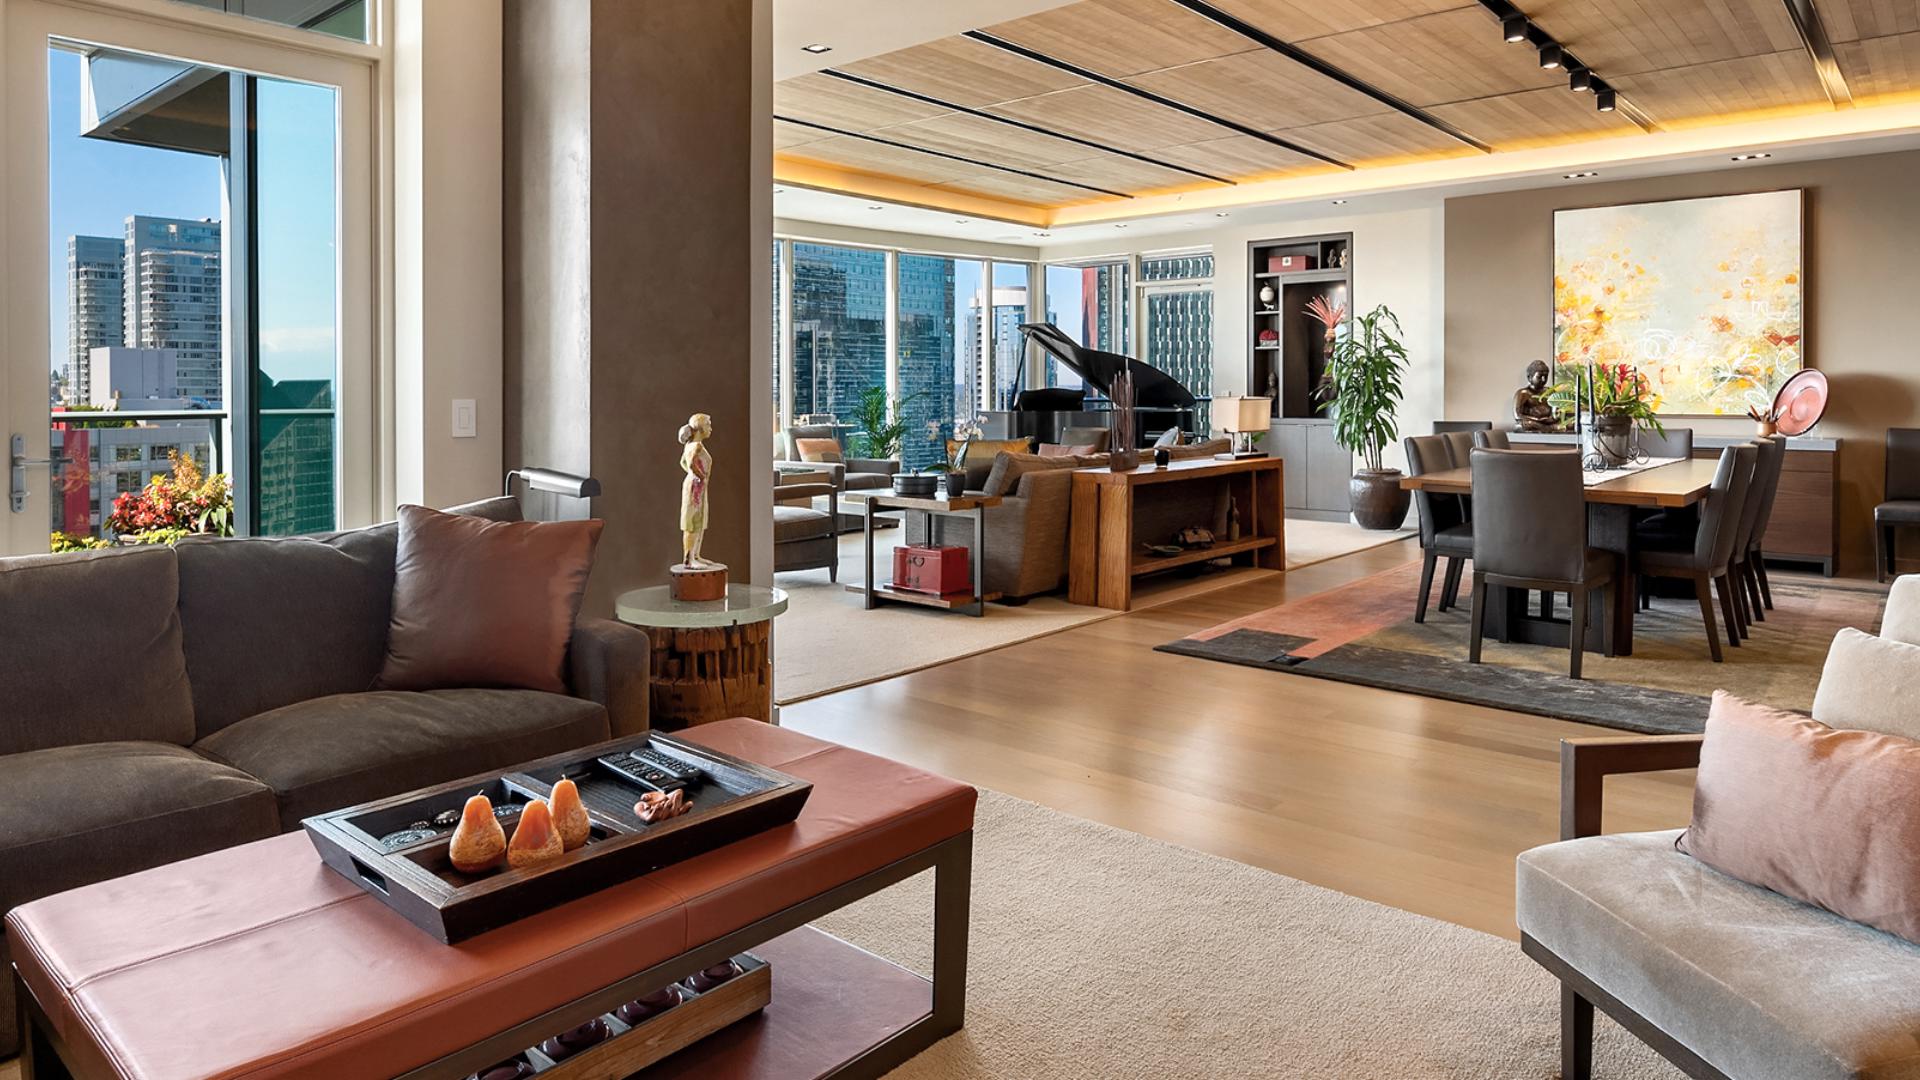 The 4,200-square-foot home in the Escala building has views of the city, Sound and mountains. #k5evening